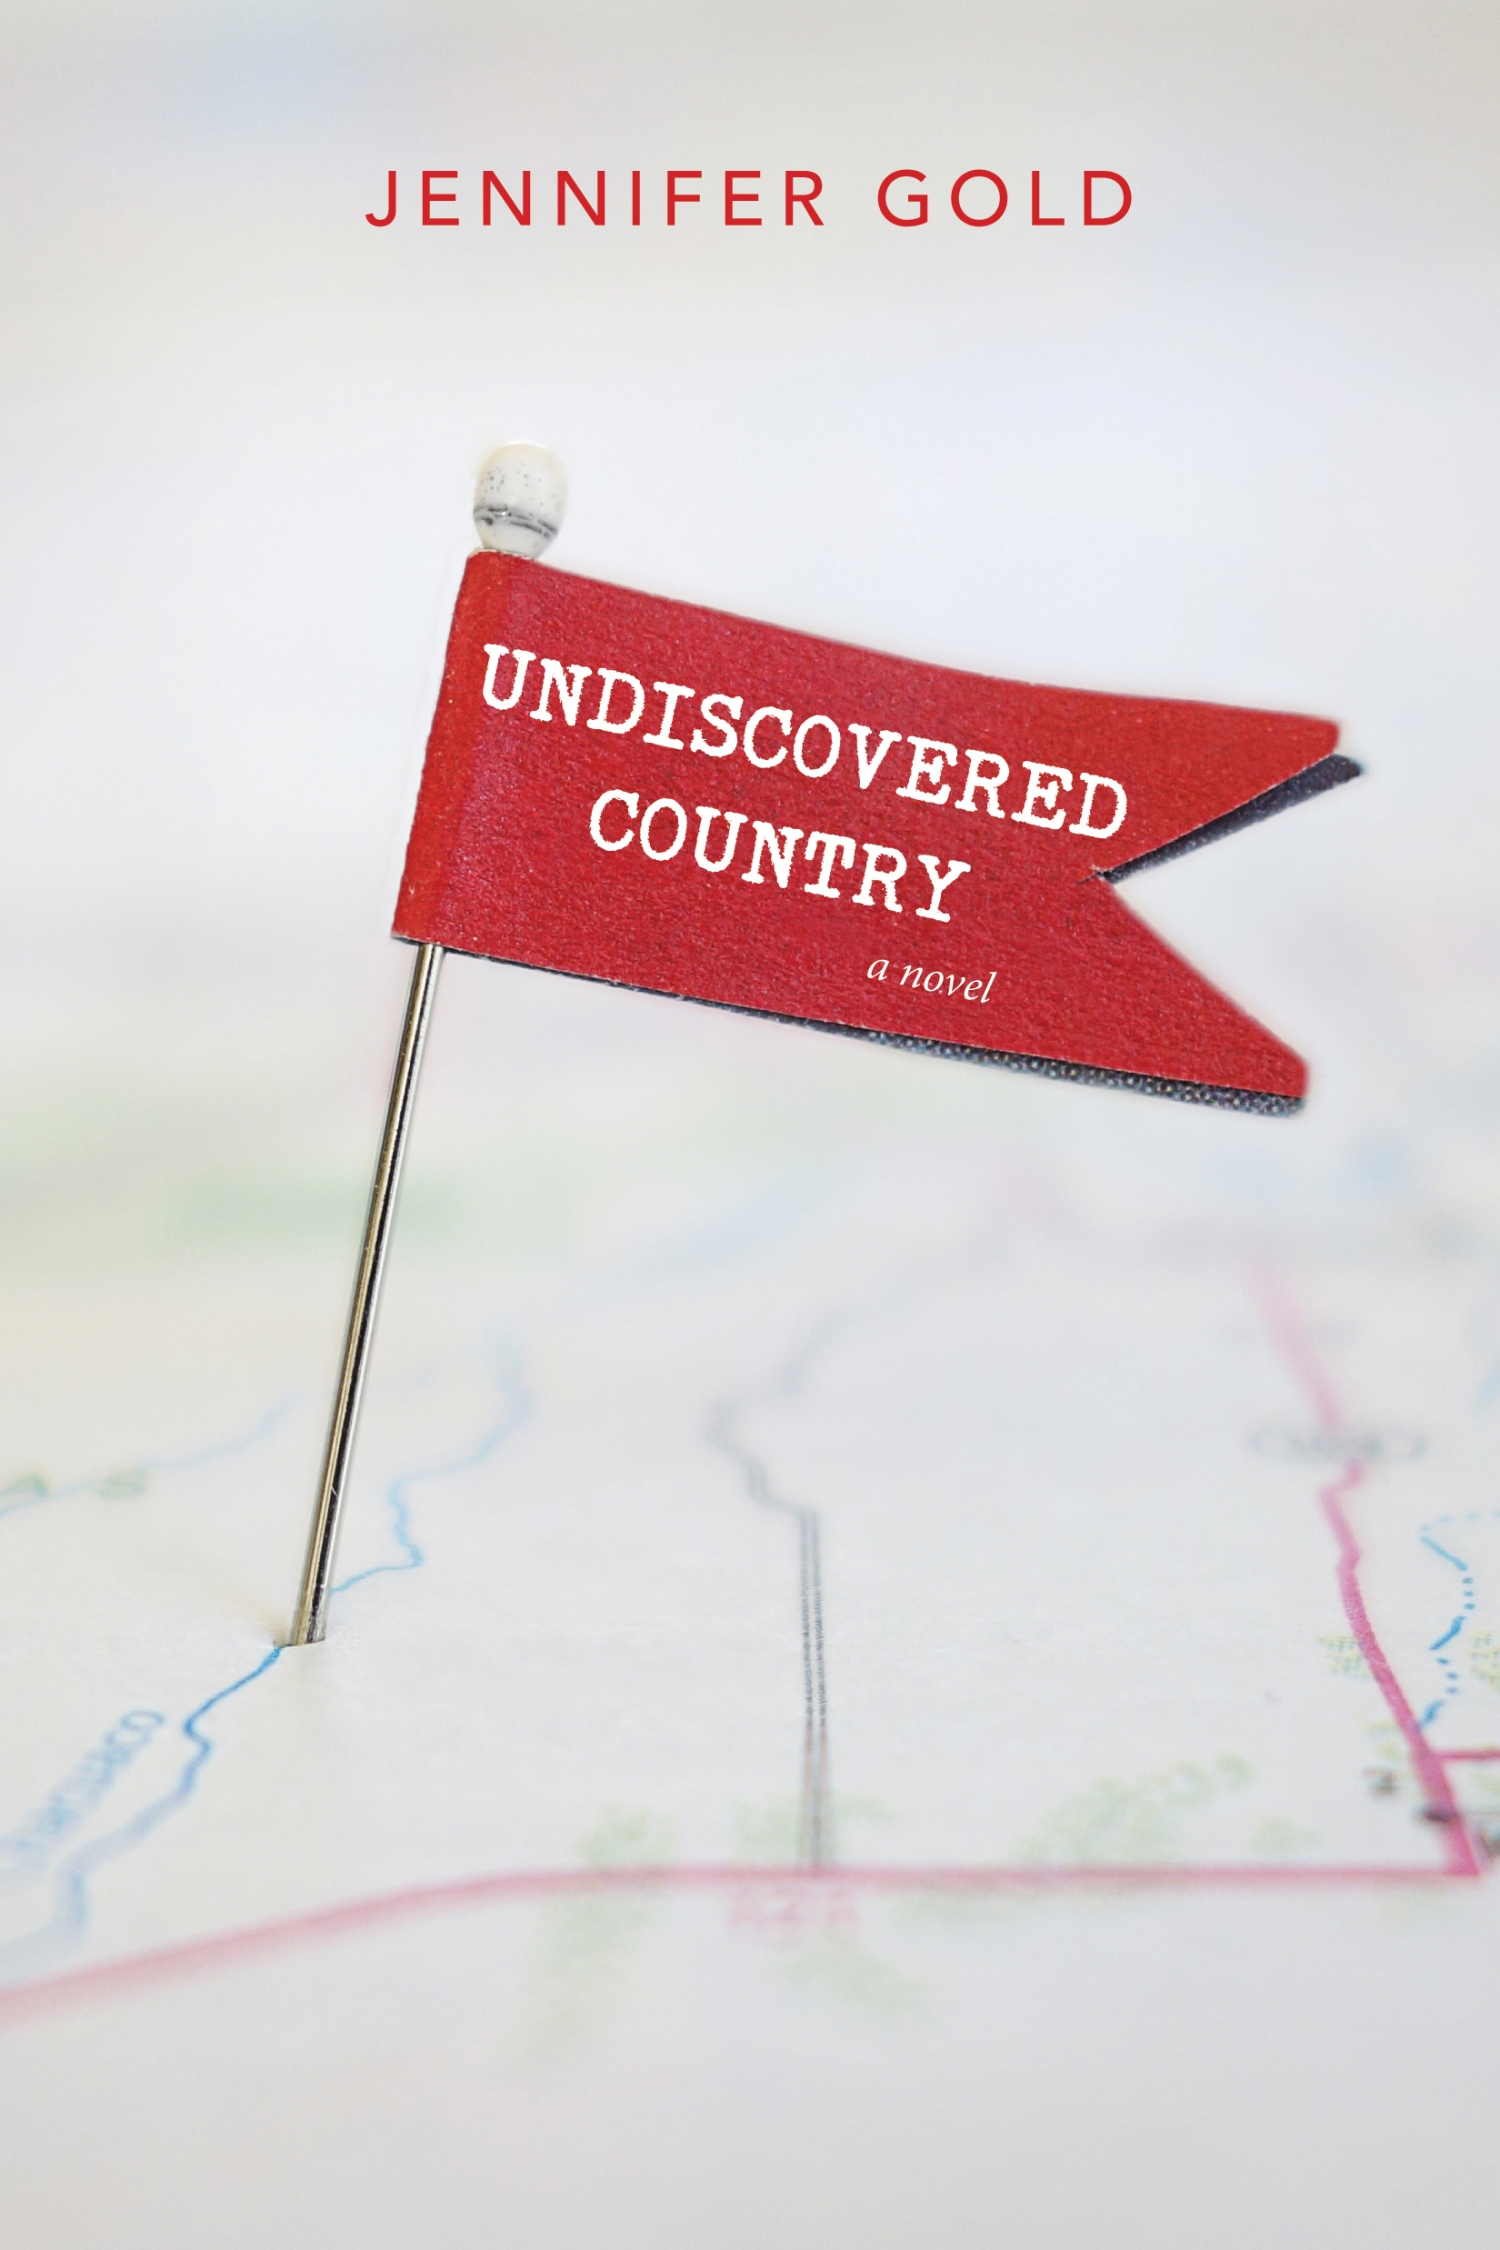 Undiscovered Country by Jennifer Gold